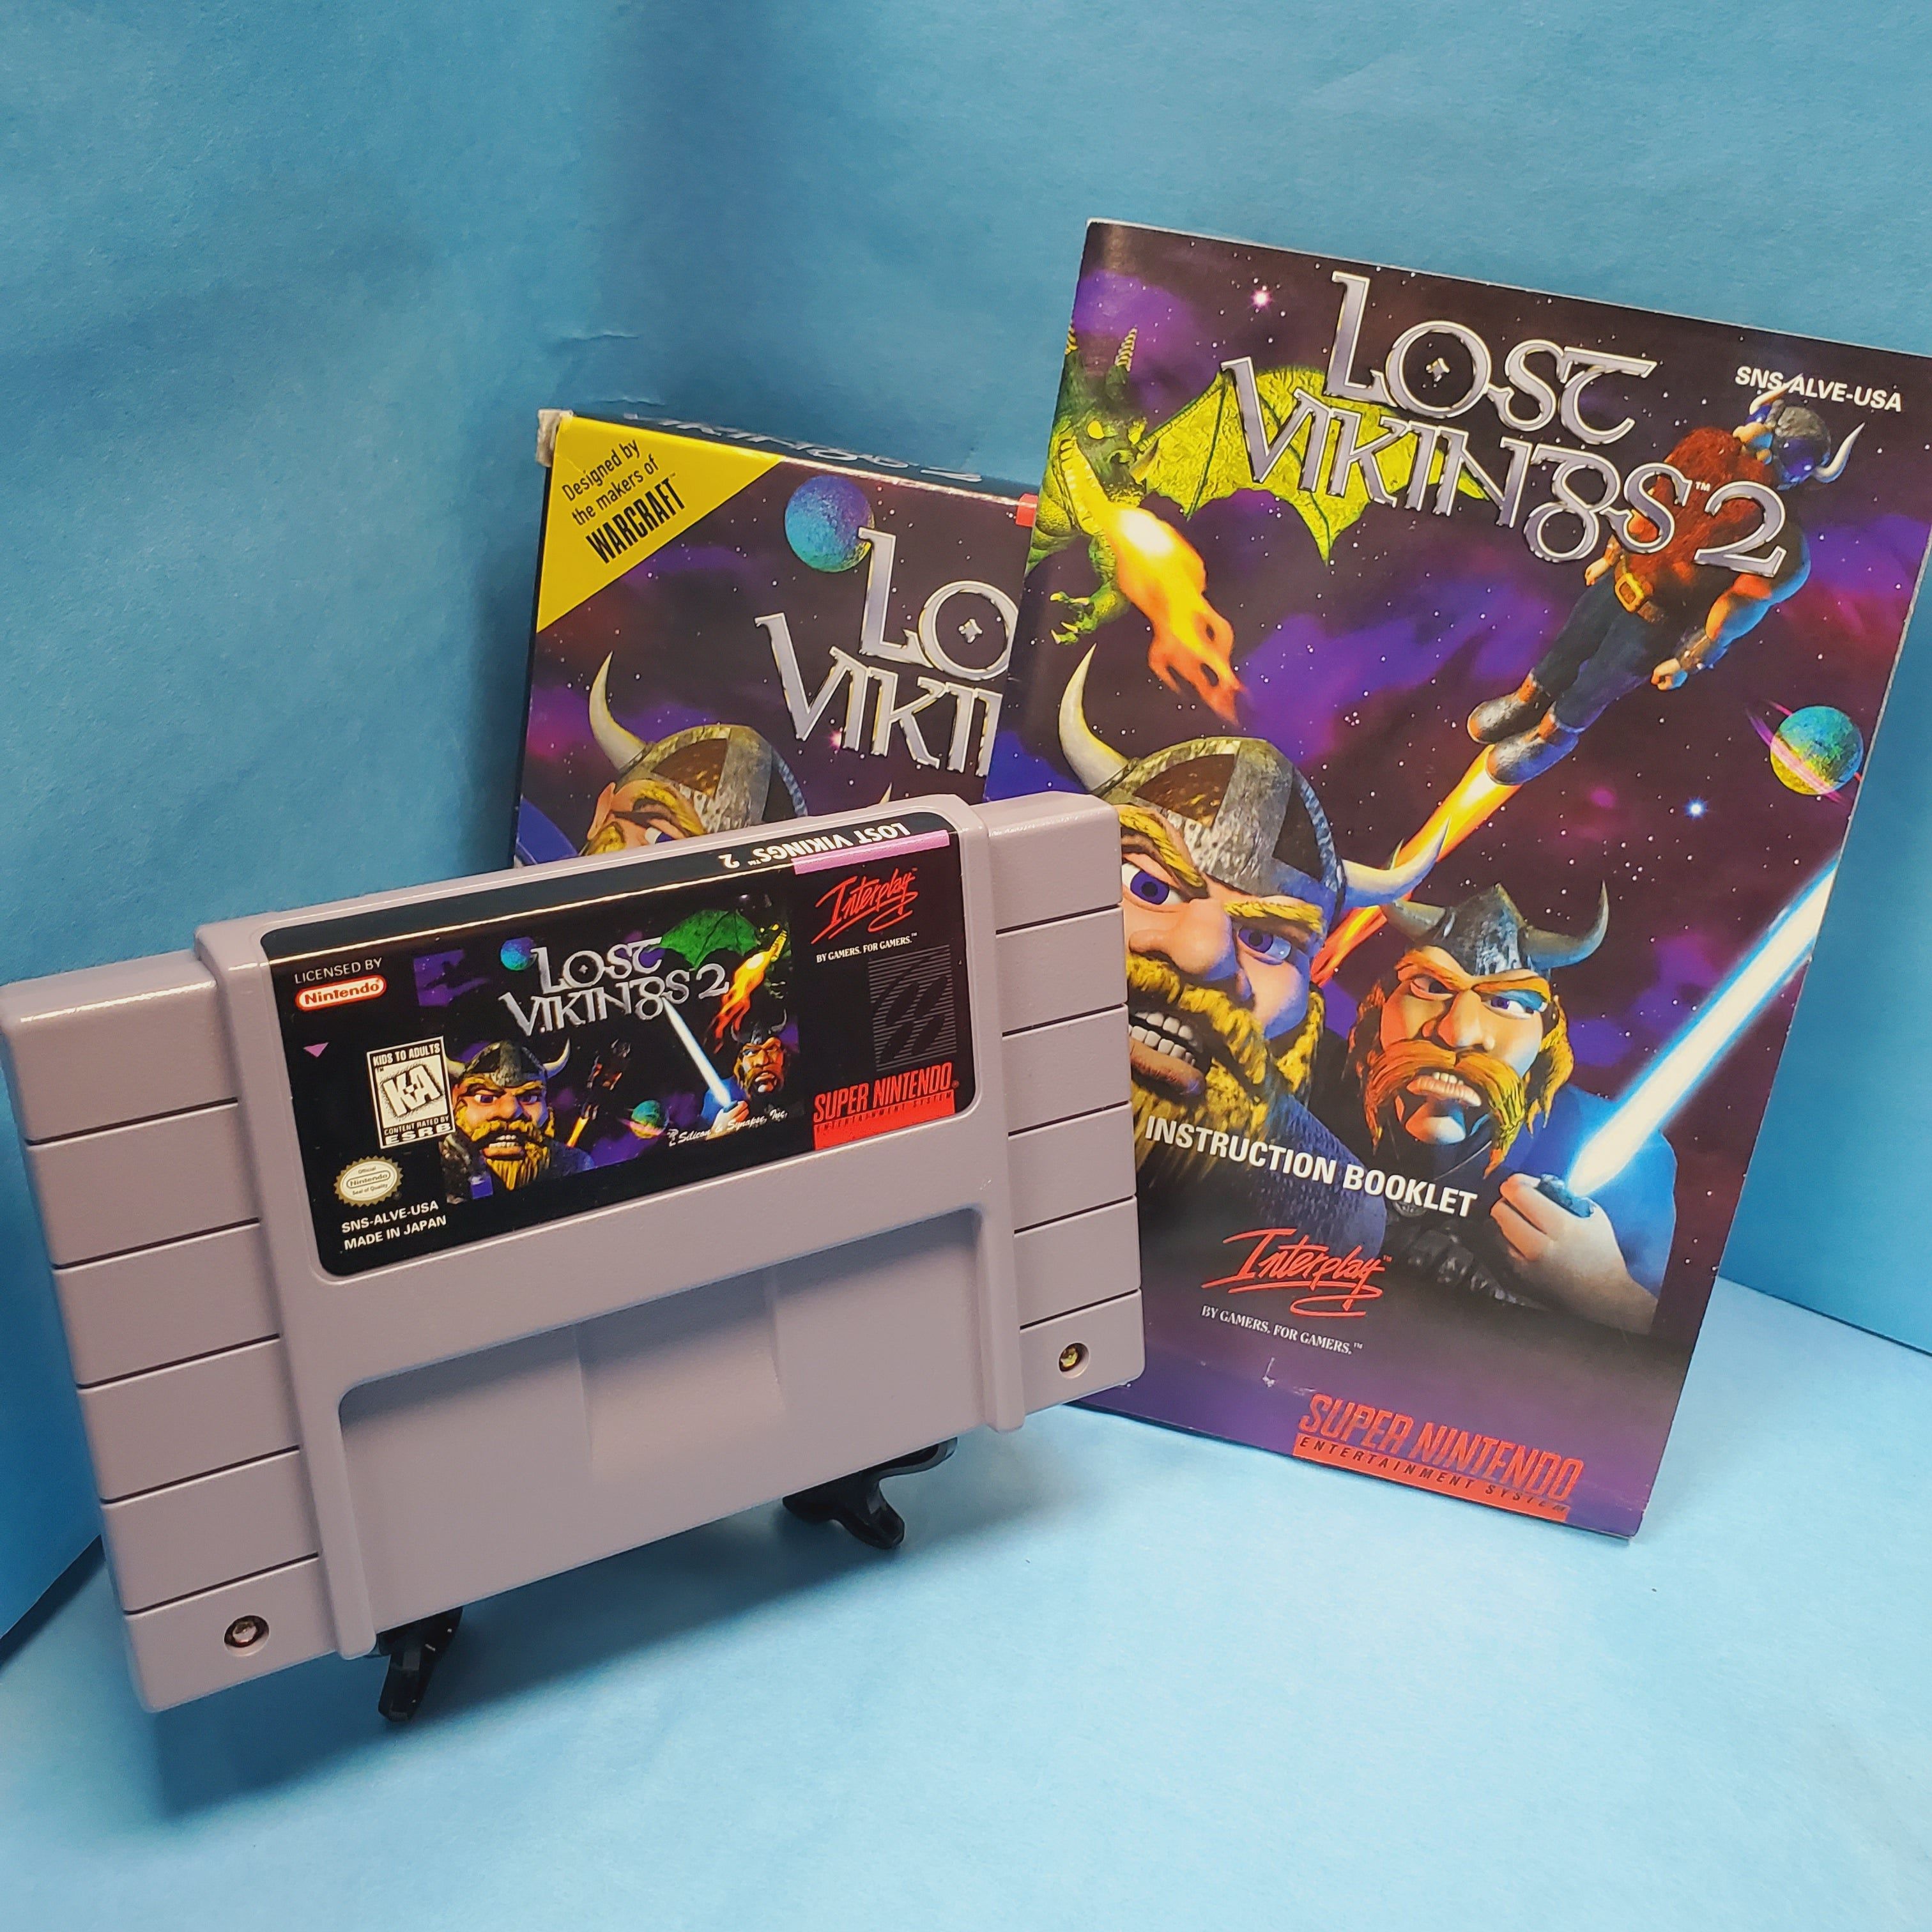 SNES - Lost Vikings 2 (Complete in Box / A+ / With Manual)